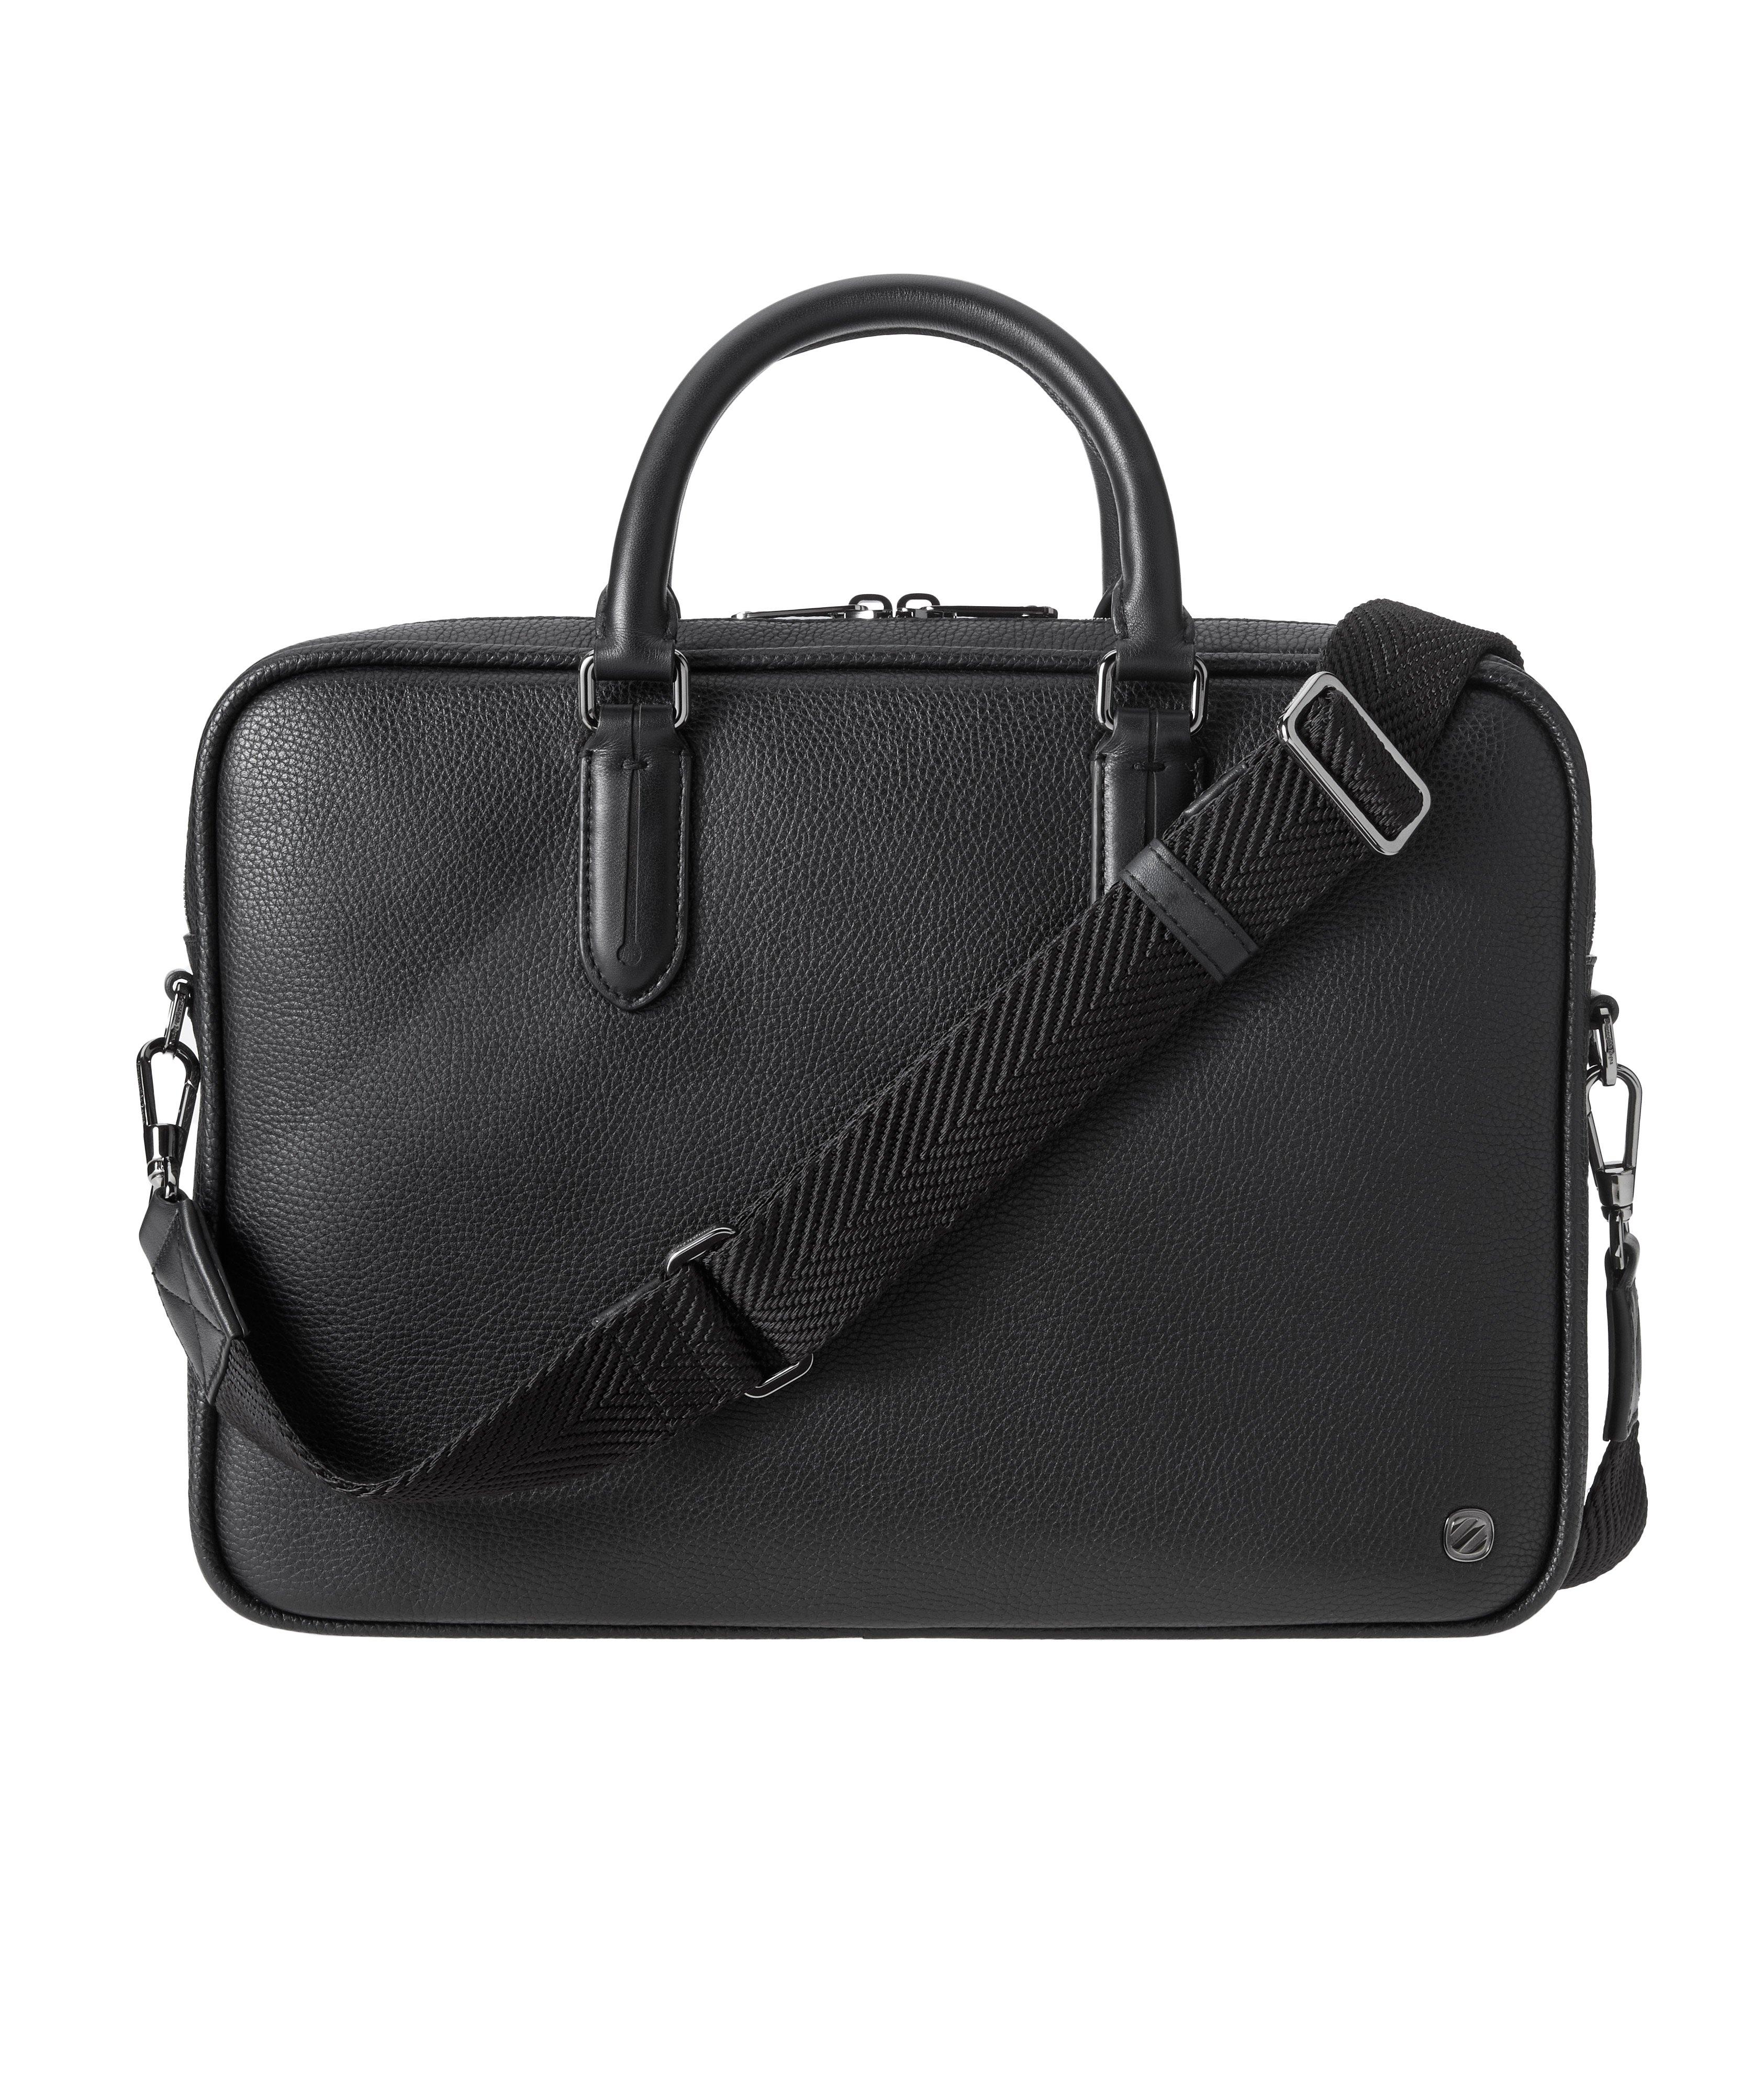 Pebbled Grain Leather Business Bag Briefcase image 0